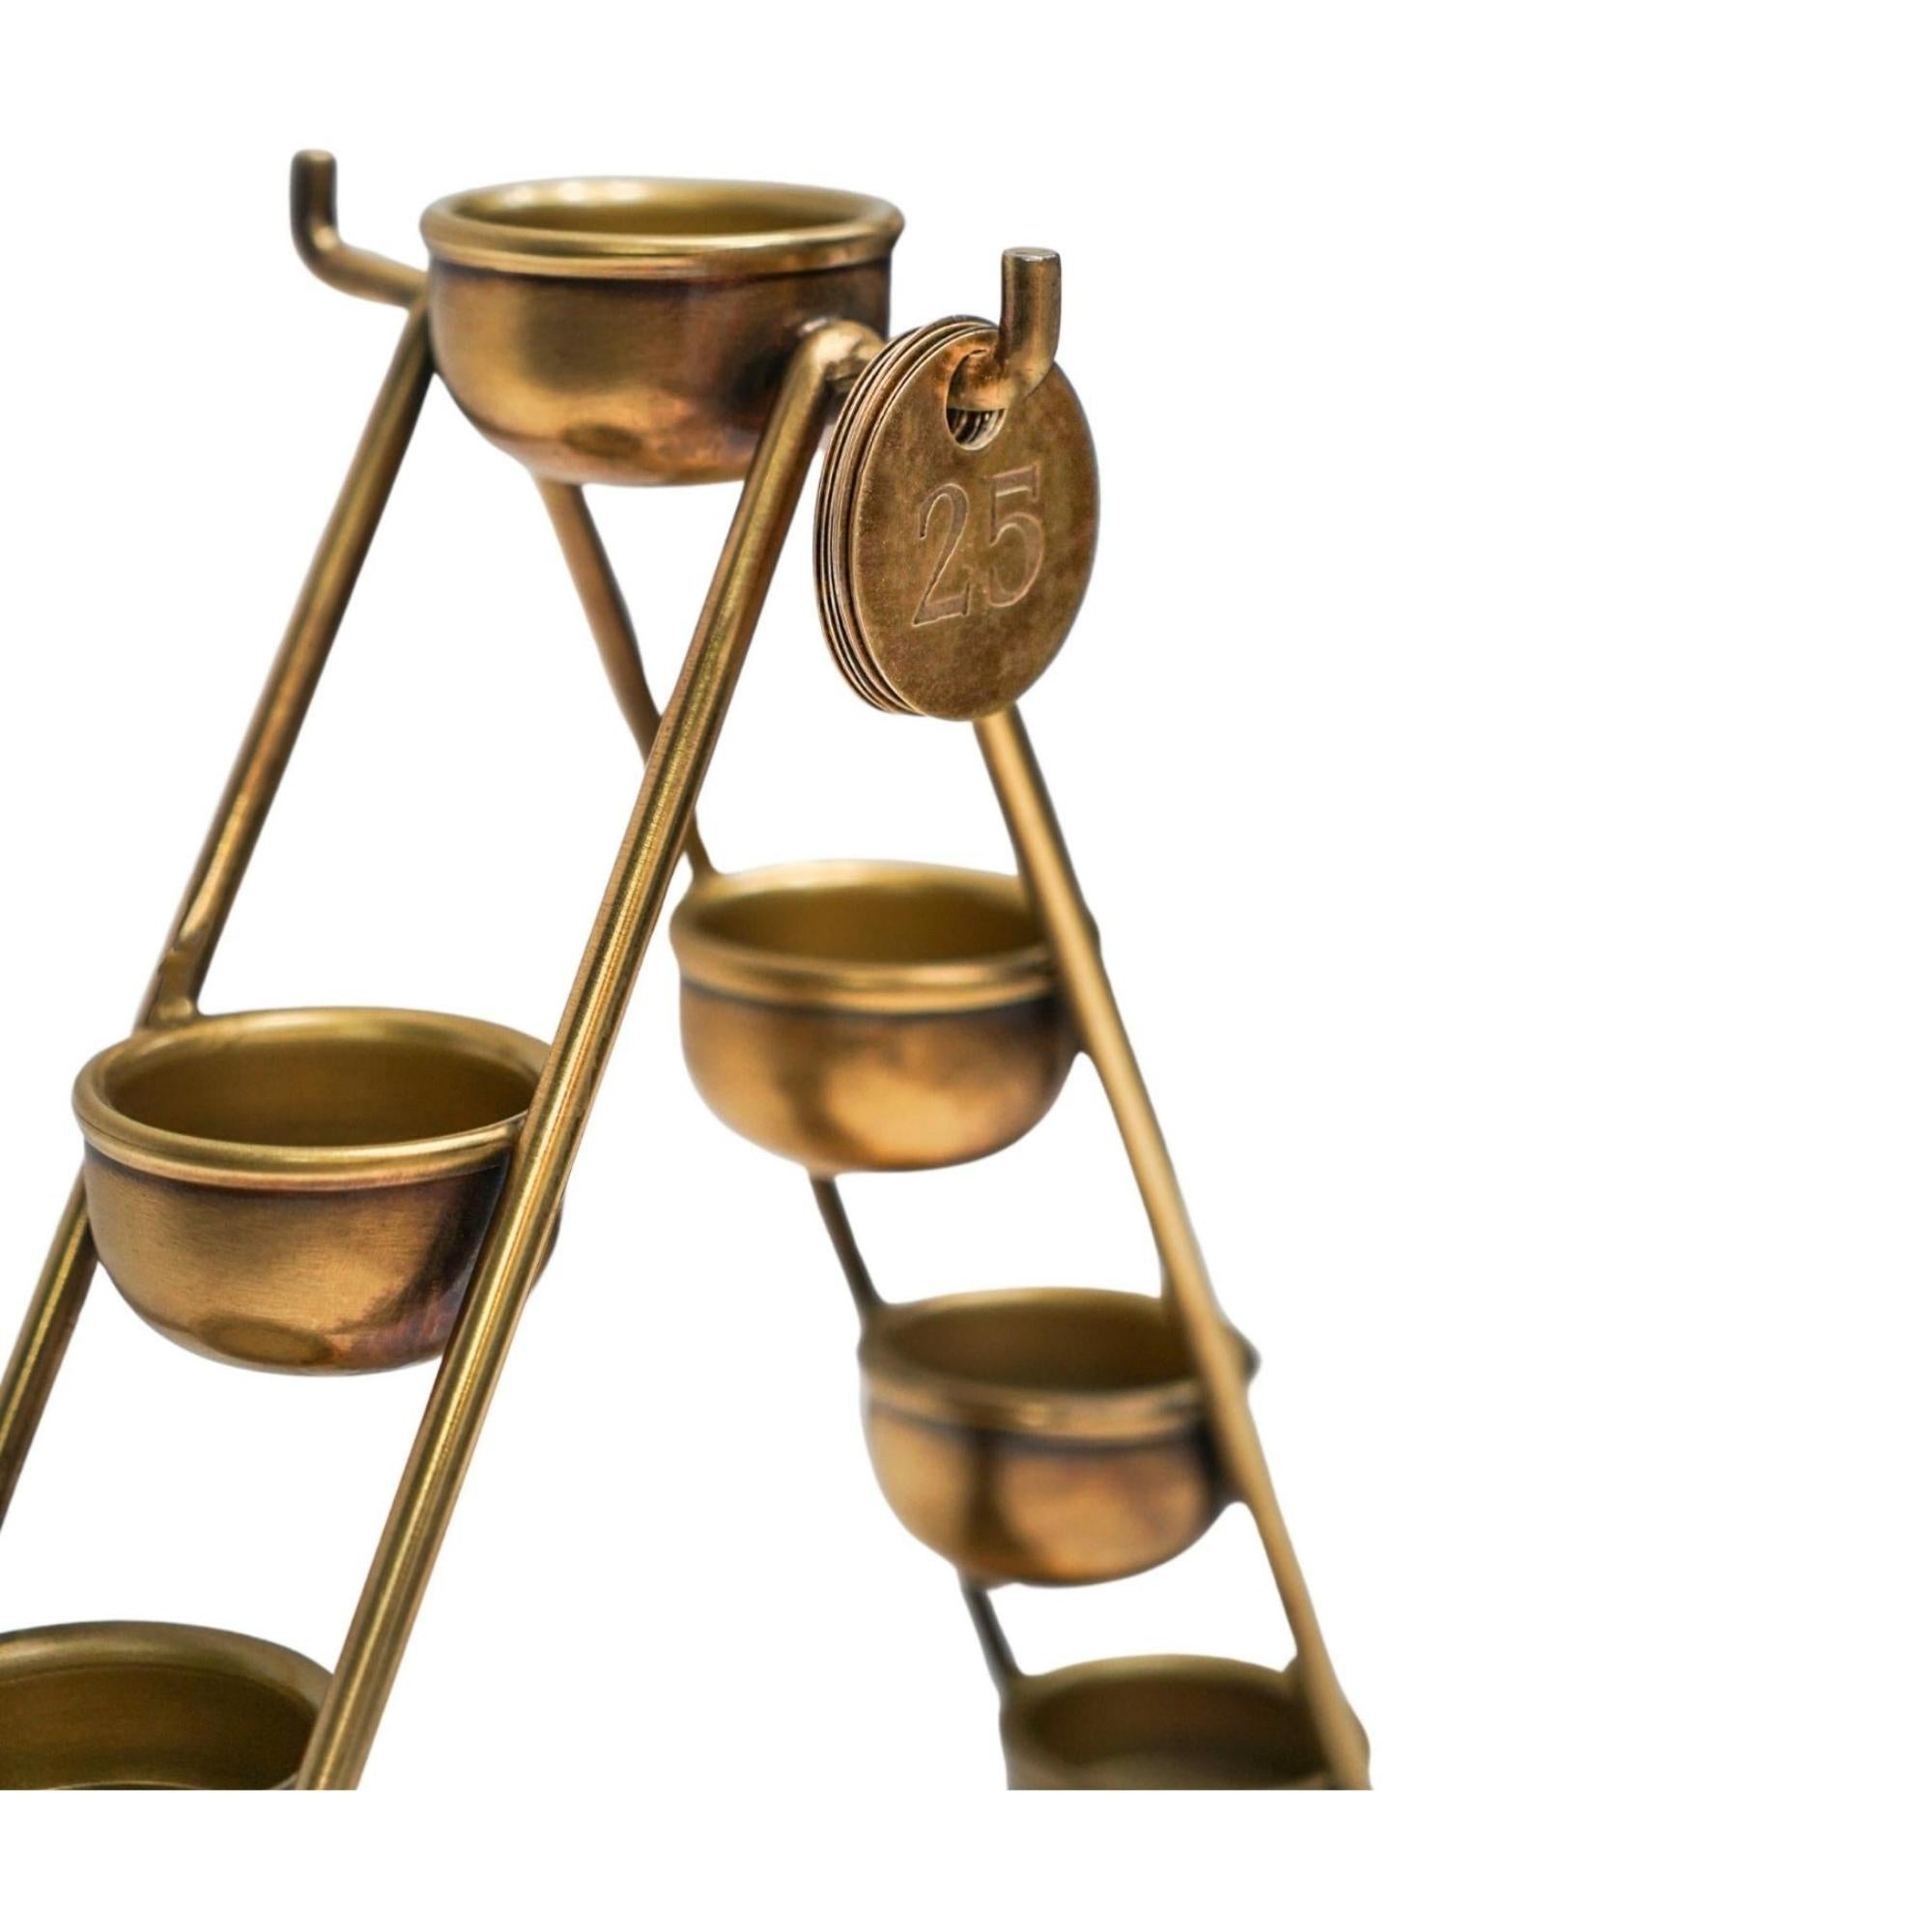 Advent Countdown Candle Holder with Date Discs in Antique Brass